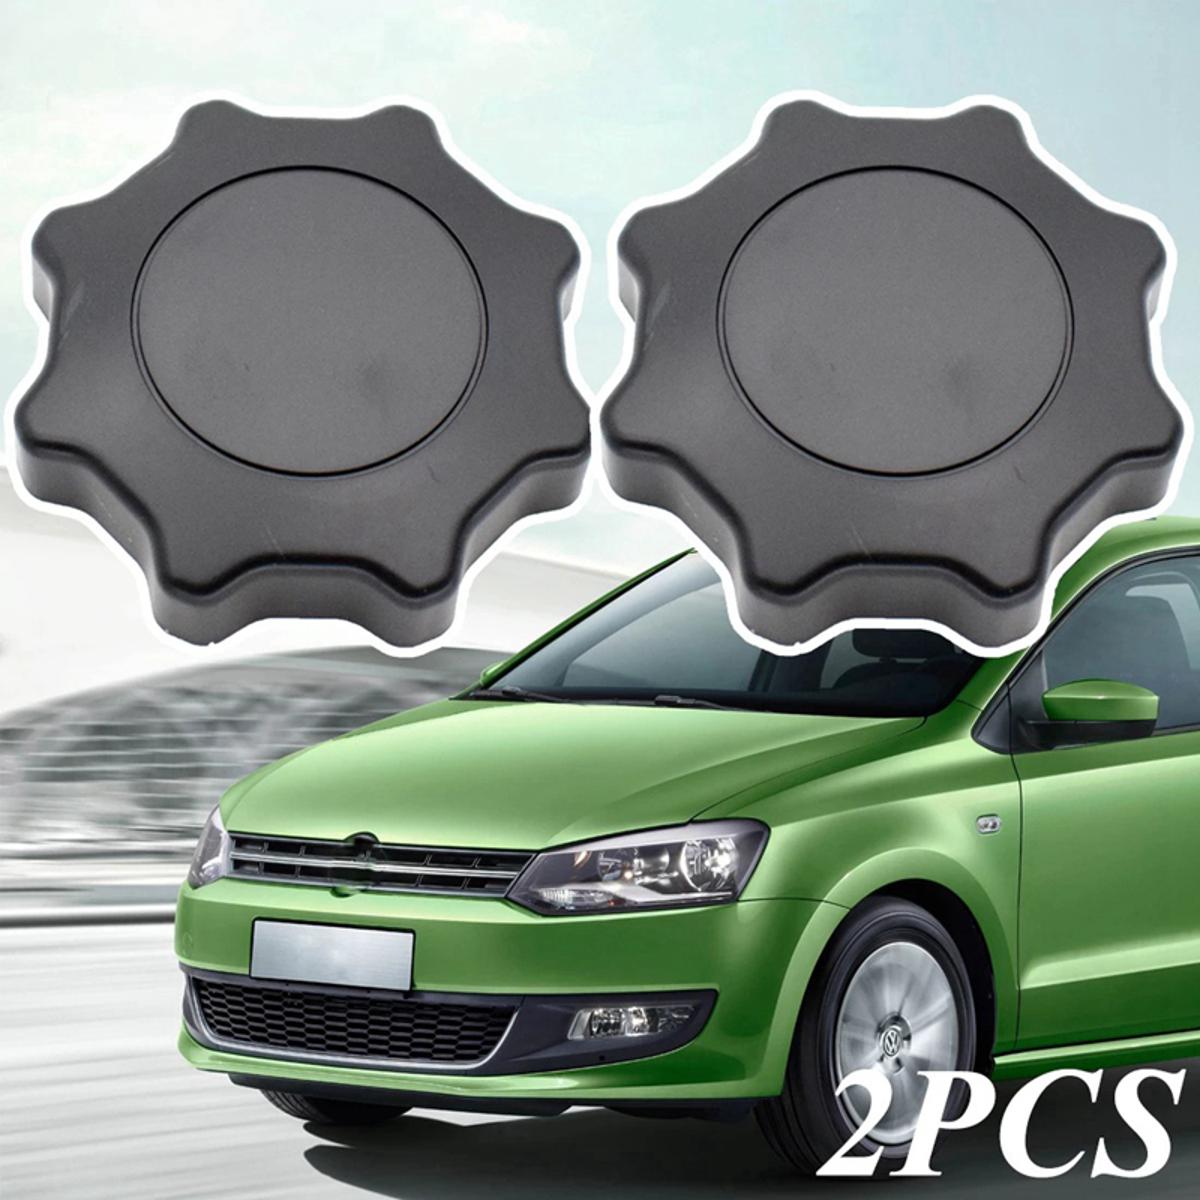 3Pcs/Set ABS Car Steering Wheel Button Cover Sticker Interior Decoration  for MG5 MG6 MG HS ZS Car Styling Carbon fiber